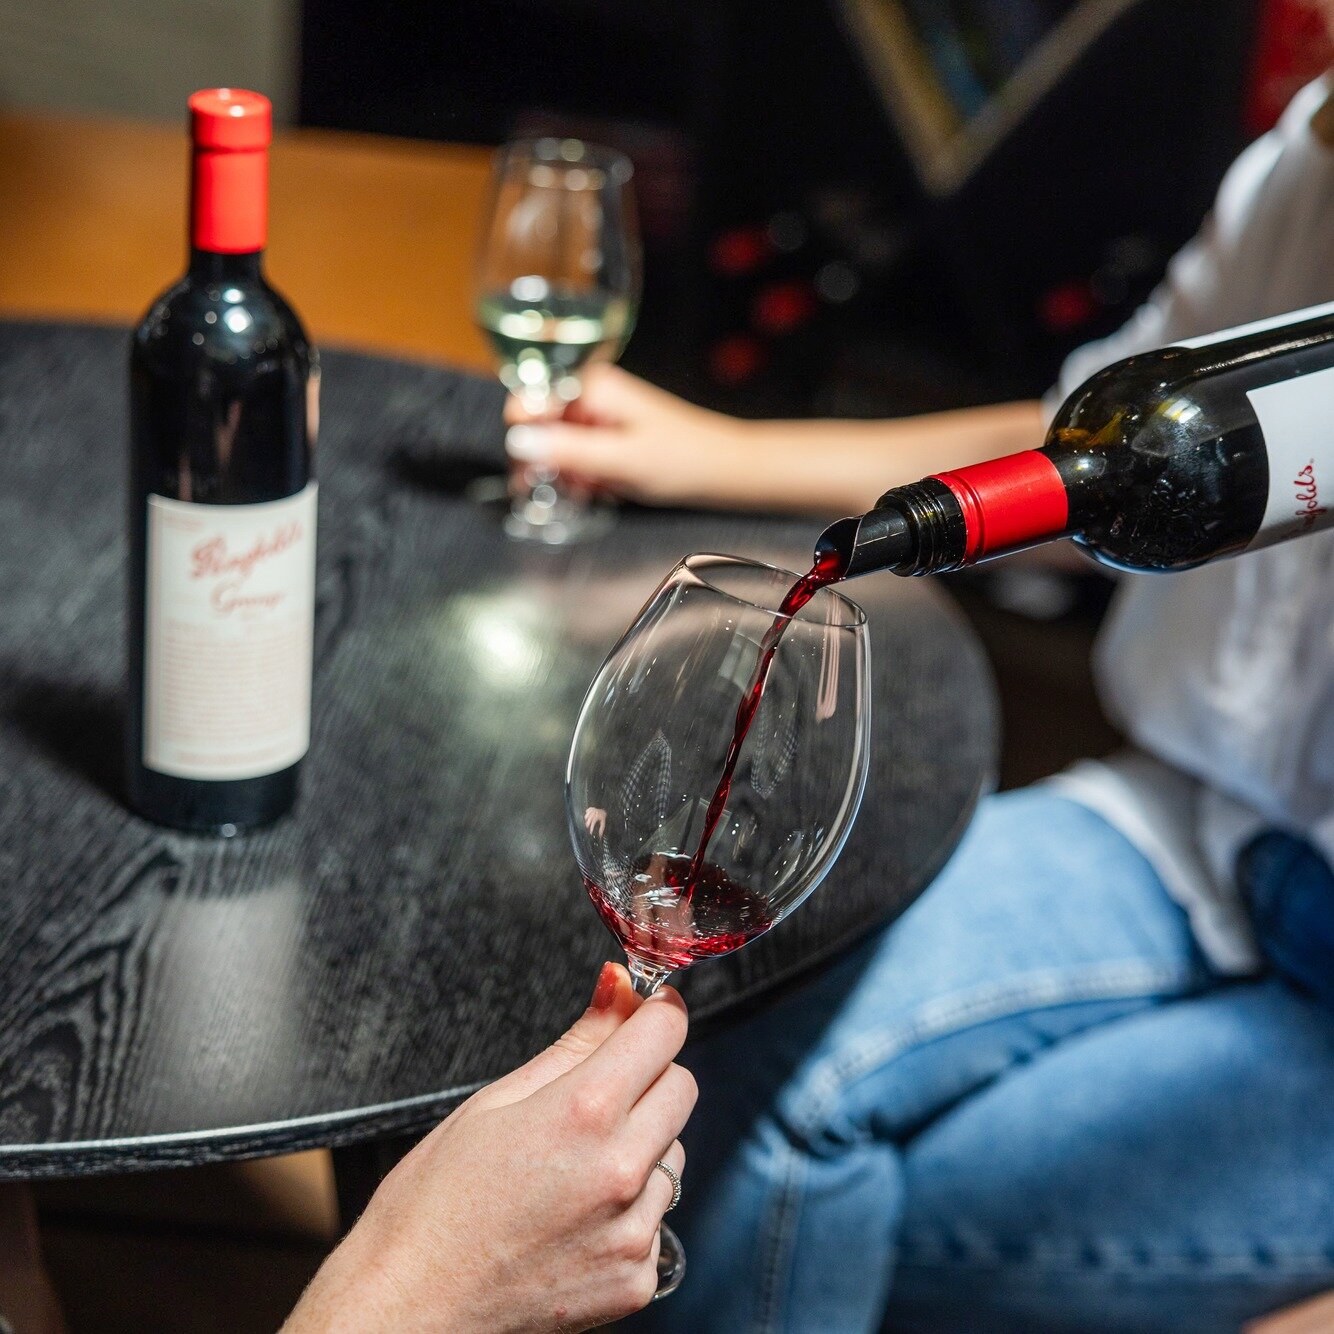 Treat yourself to an unforgettable Grange tasting experience at Provenance. 🍷 Let @penfolds' experienced and knowledgeable staff guide you on a journey of indulgence and discovery. ✨

Visit Penfolds. Open 10-5pm every day.

#provenance #provenanceba